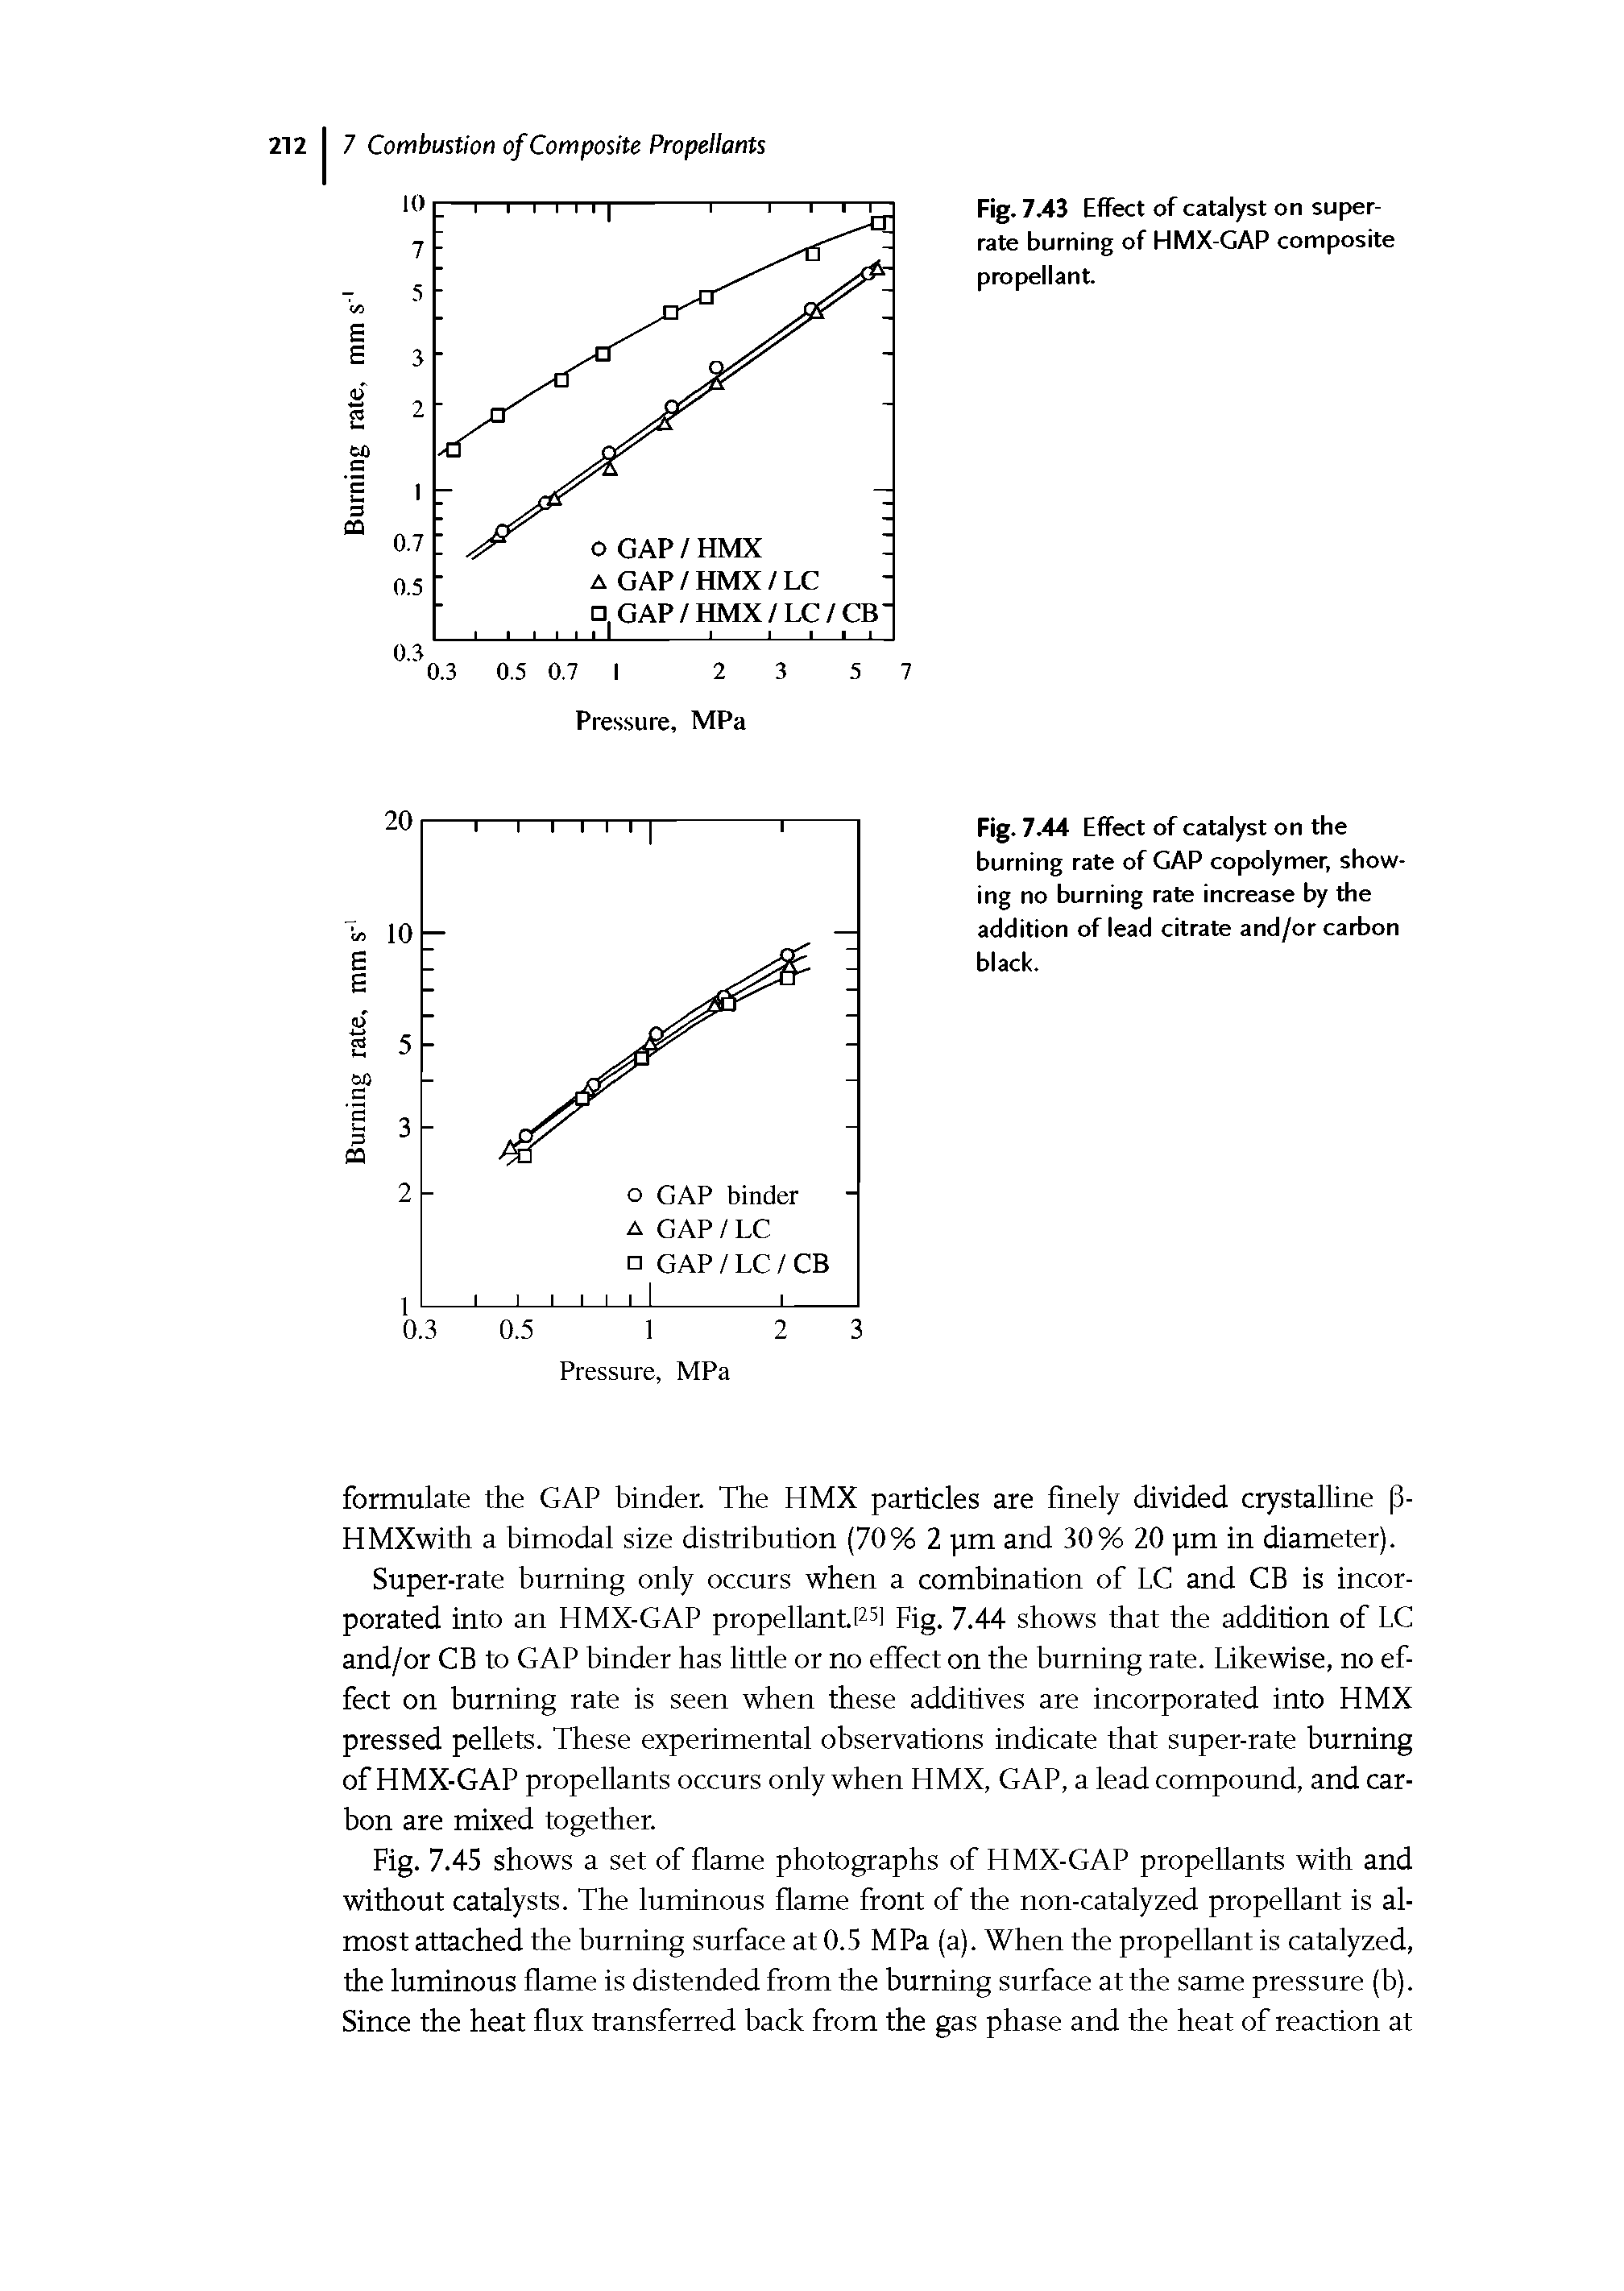 Fig. 7.44 Effect of catalyst on the burning rate of GAP copolymer, showing no burning rate increase by the addition of lead citrate and/or carbon black.